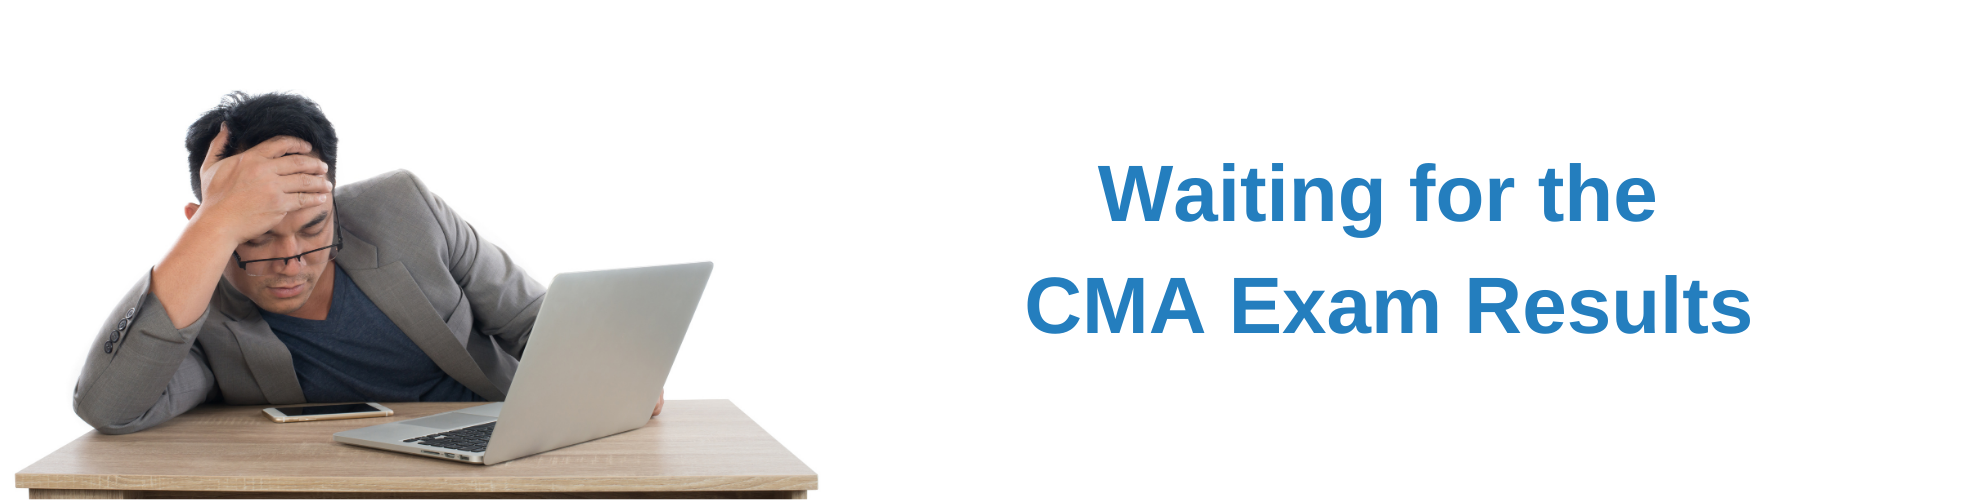 Waiting for the CMA Exam Results